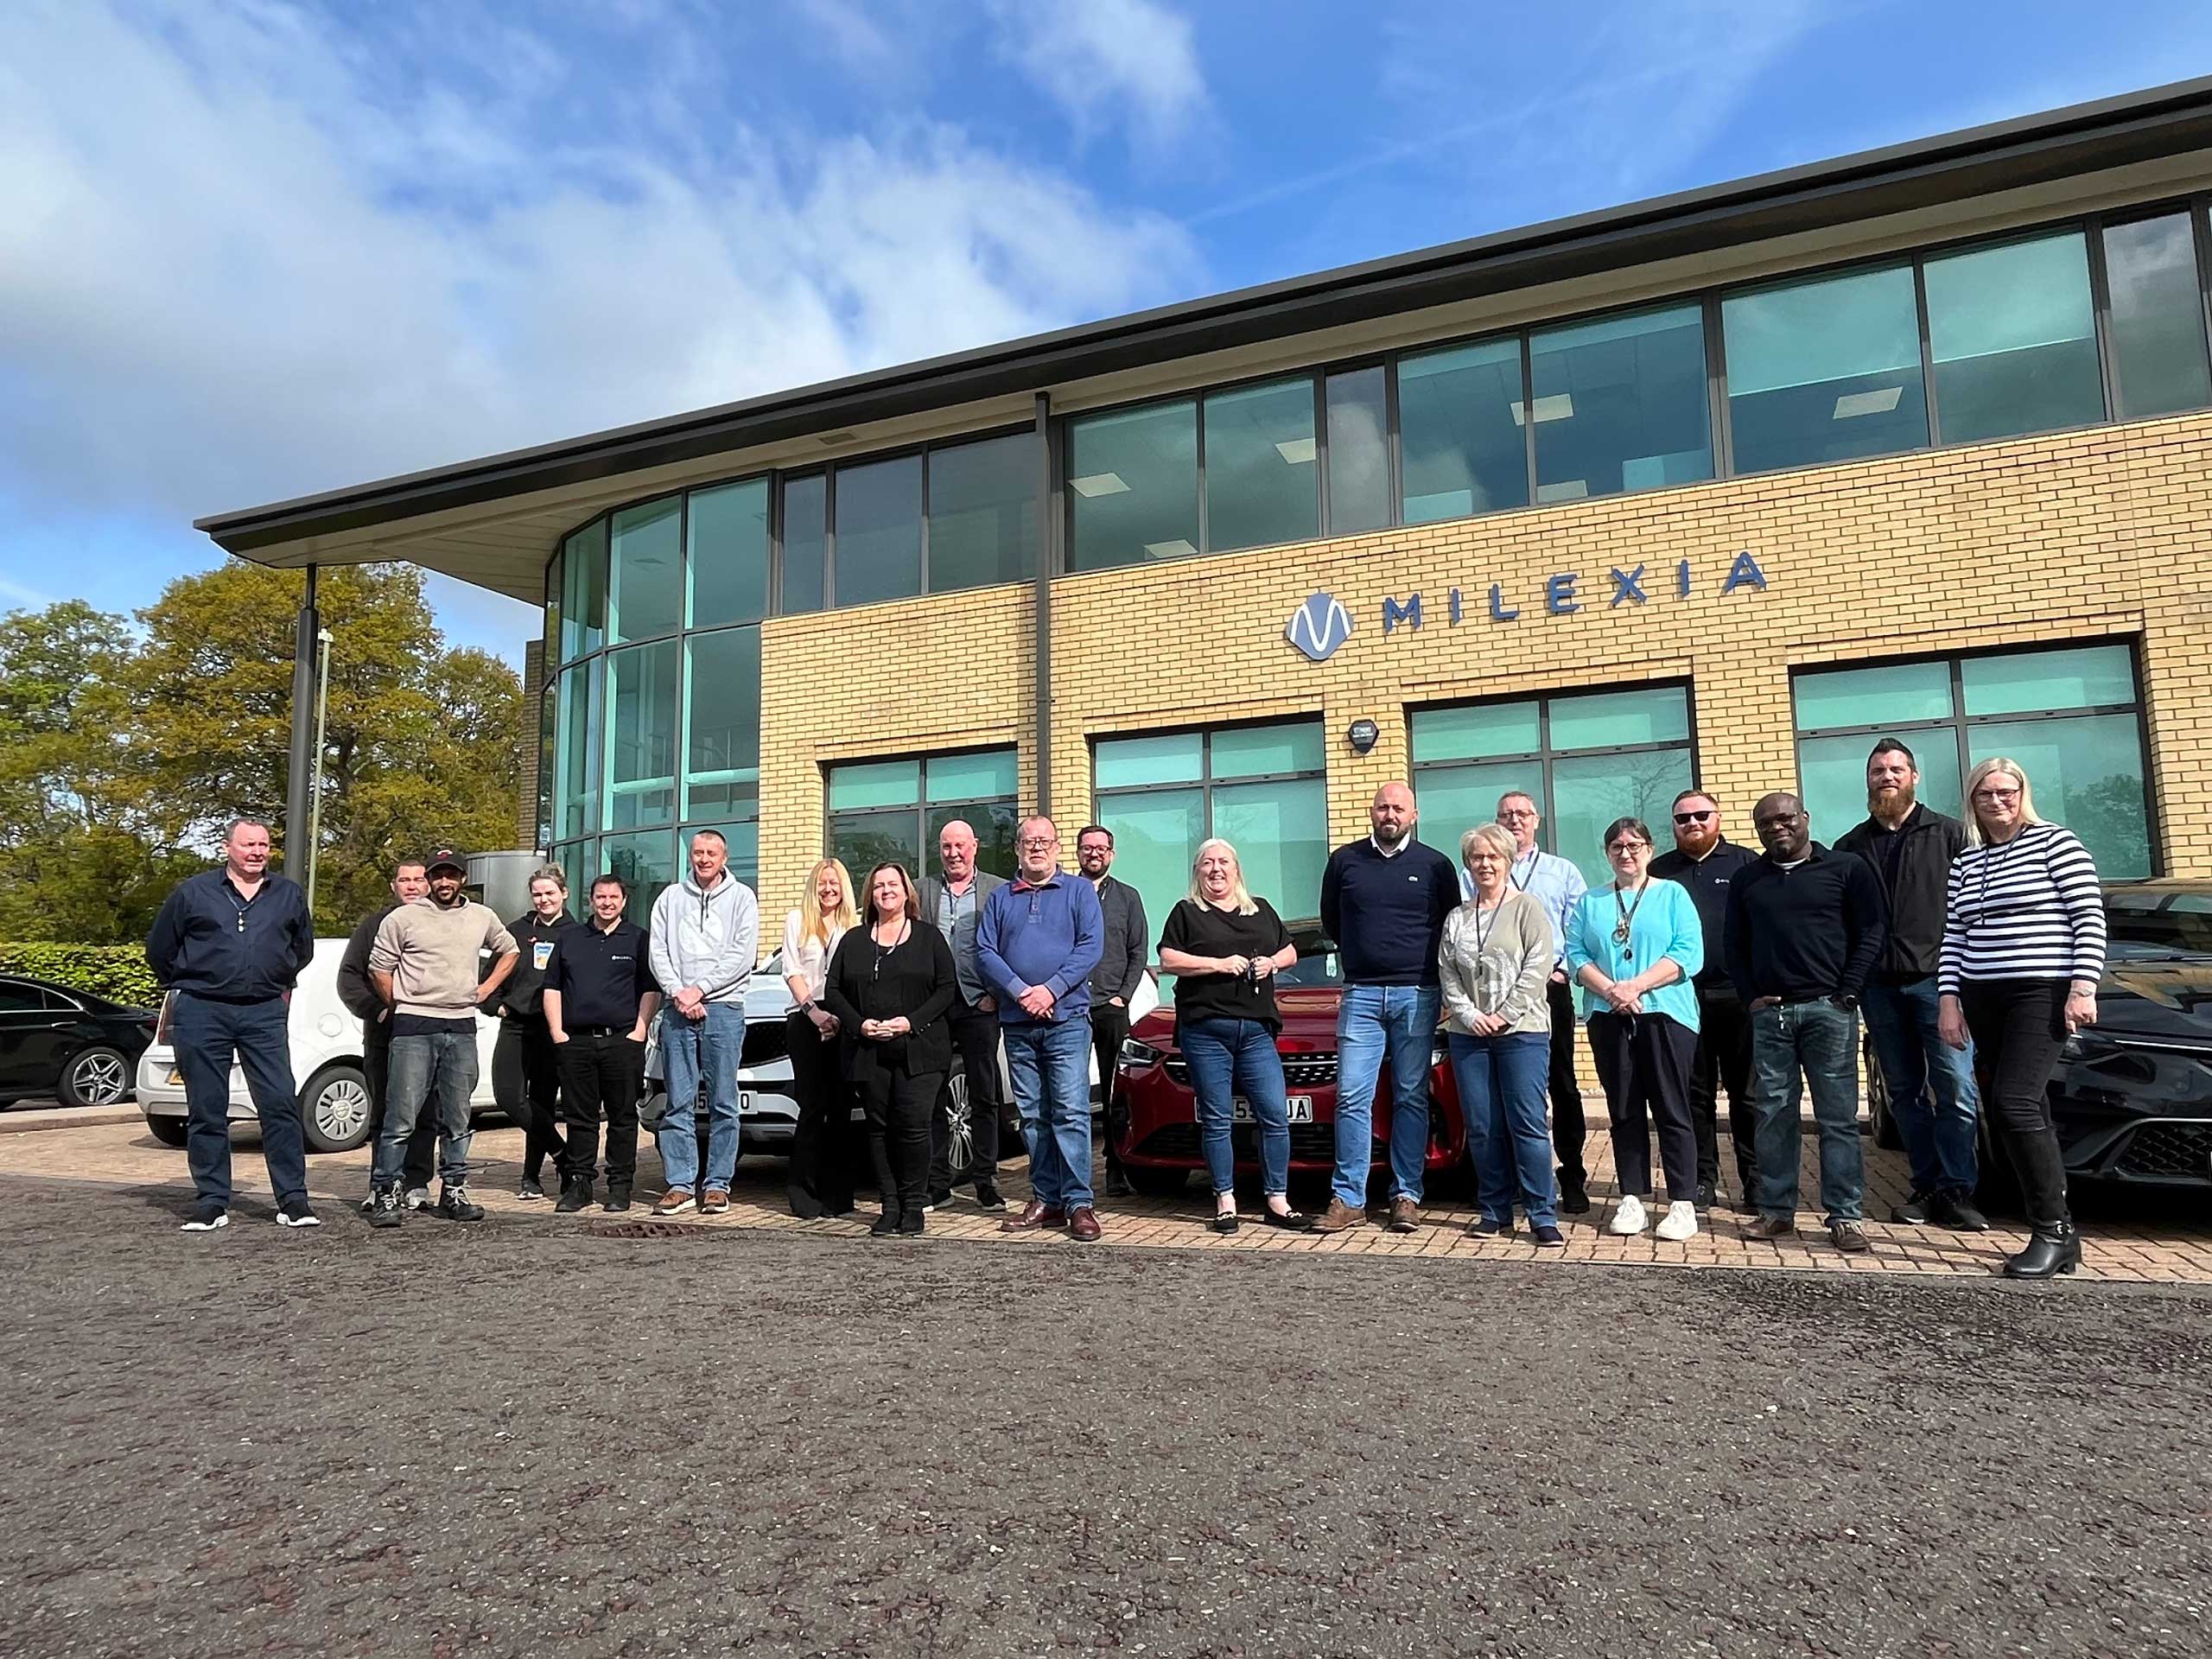 Frasers Property UK welcomes Pan-European telecommunications and technology distributor, Milexia UK, at Chineham Park